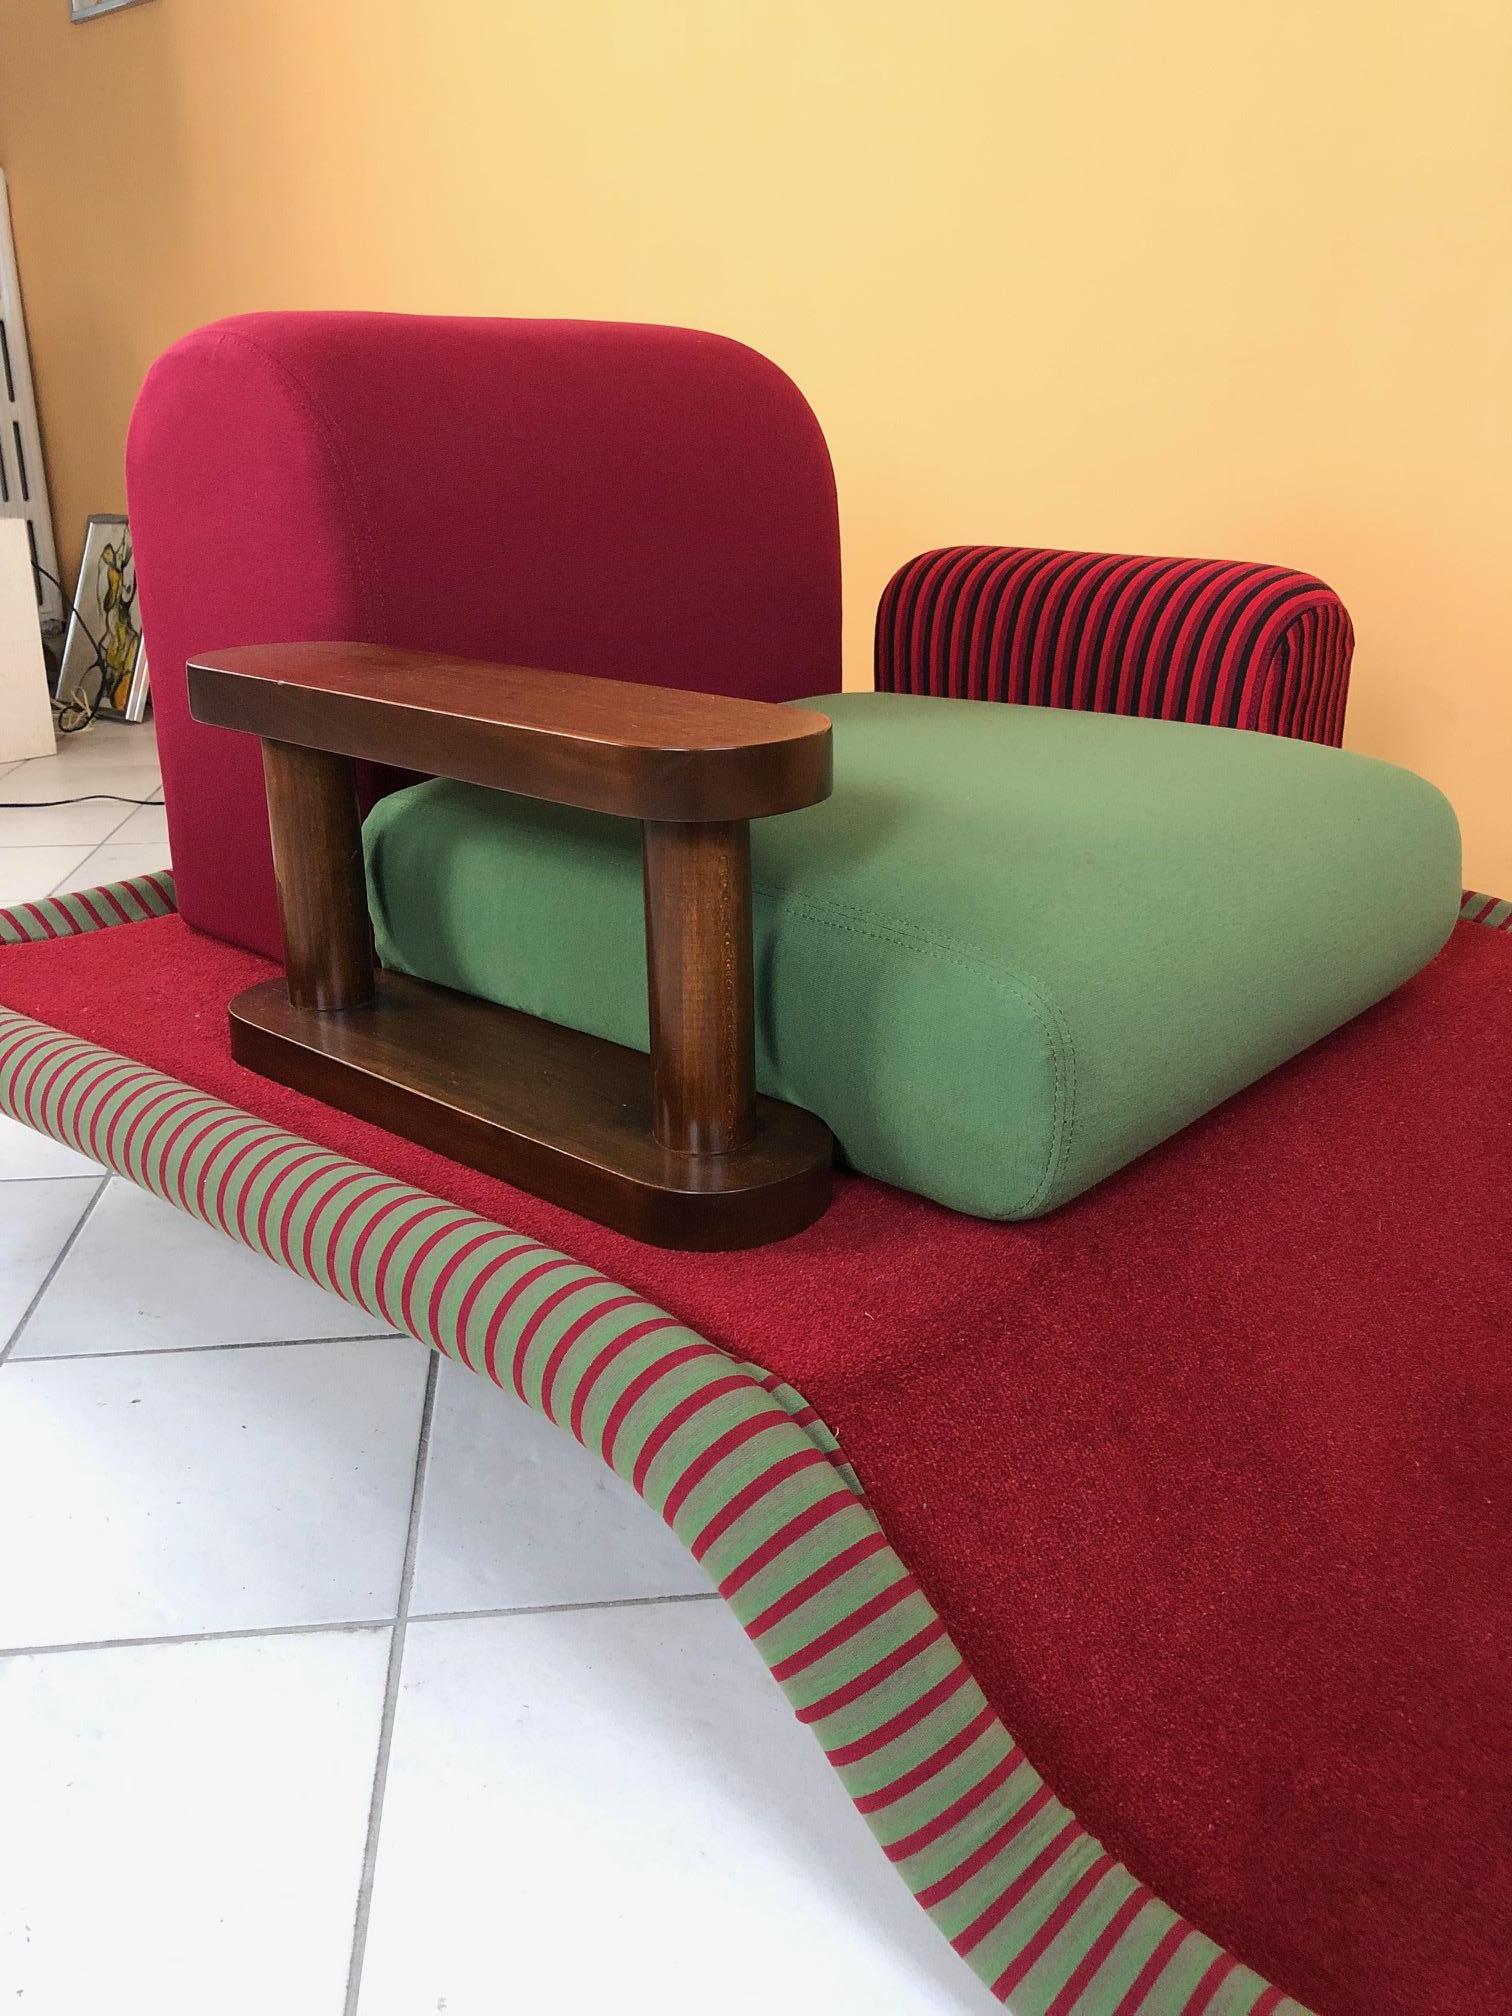 Ettore Sottsass “Tappeto Volante” Armchair for Bedding Brevetti, Italy, 1974 In Good Condition For Sale In Padova, IT